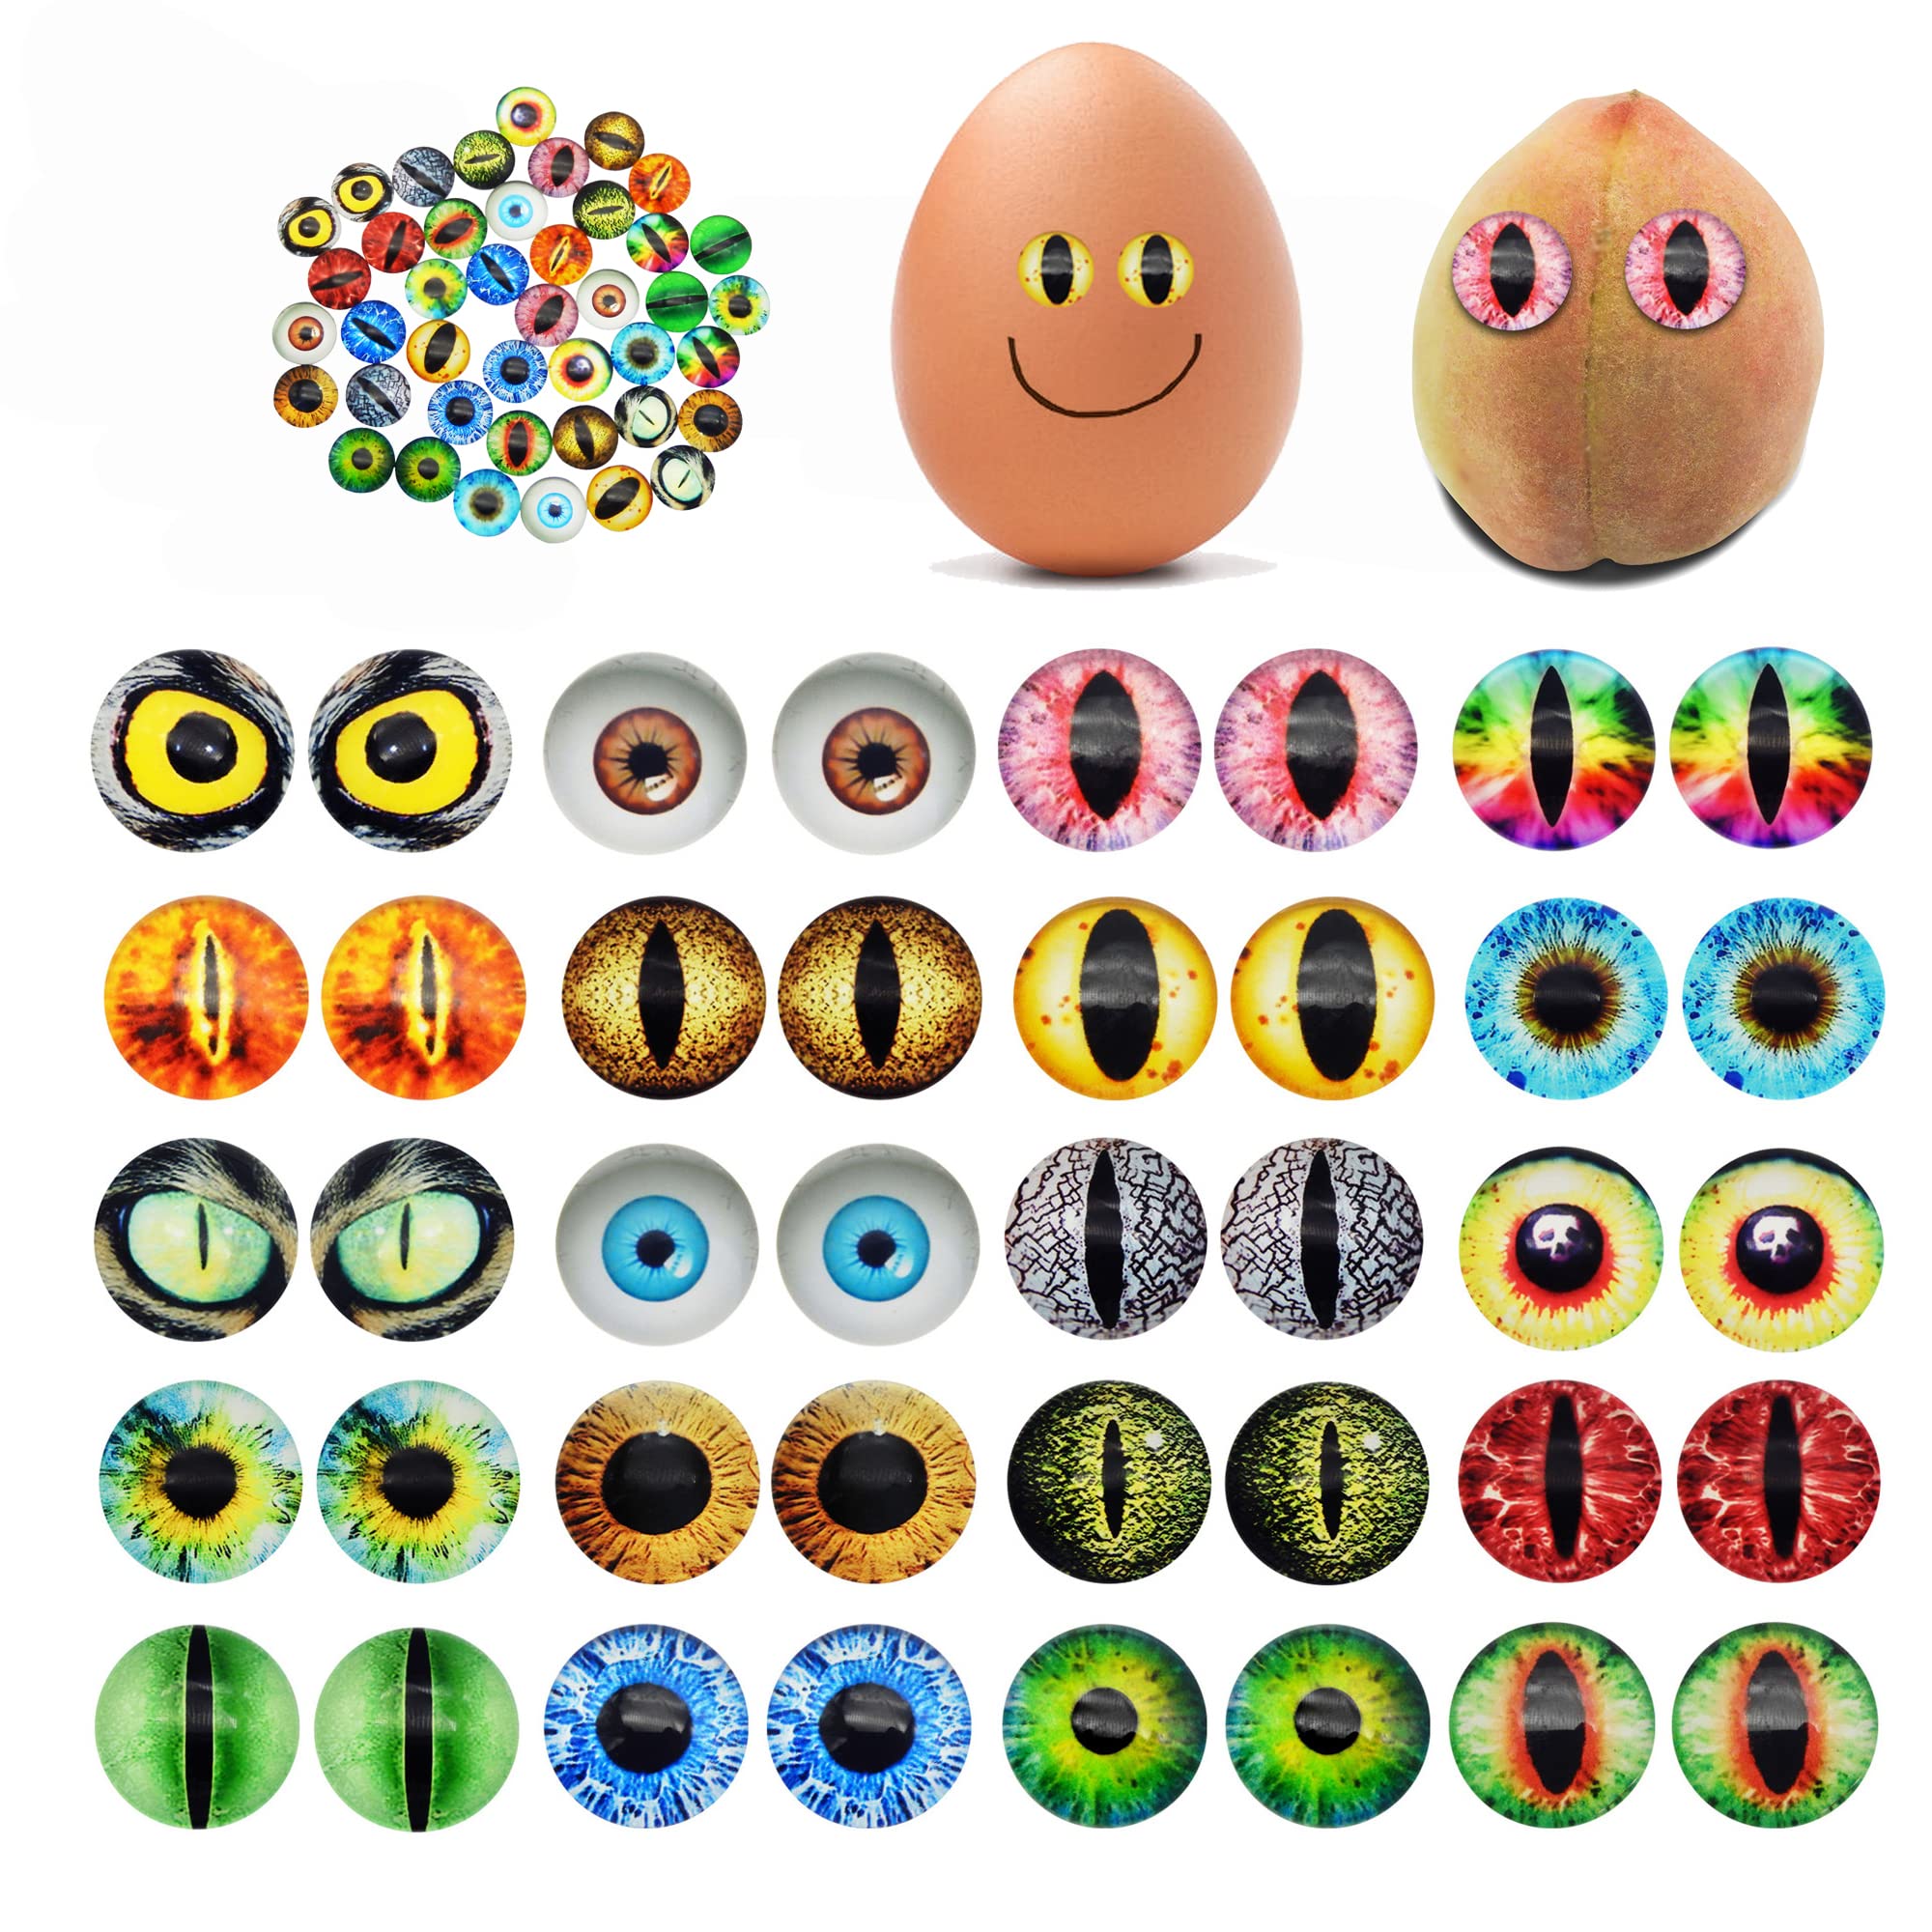 10mm Eyeball Stickers For Crafts